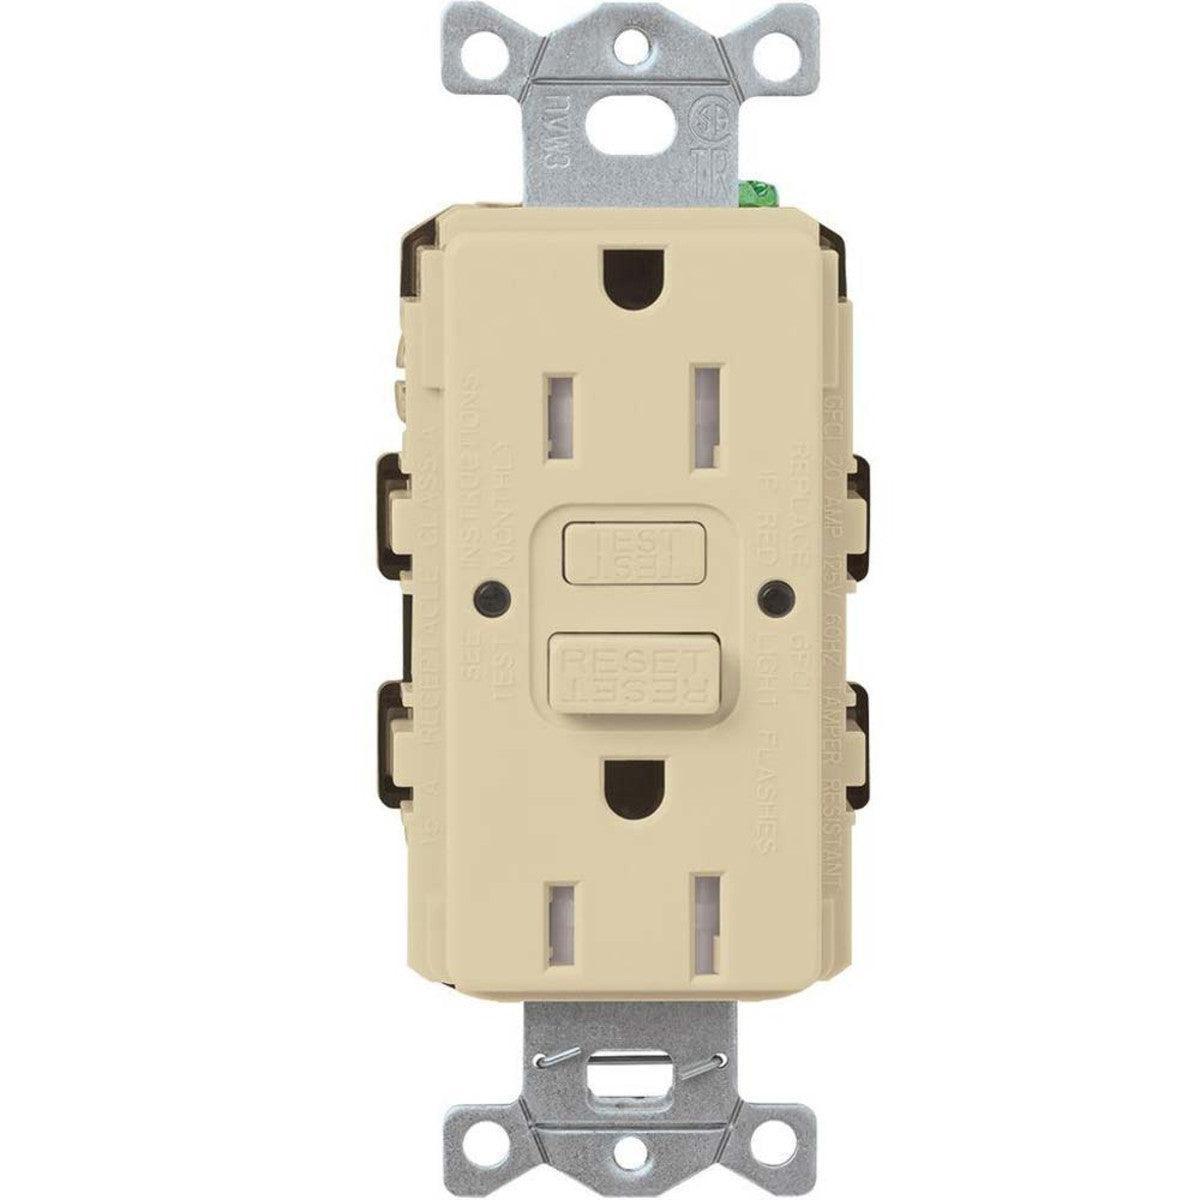 Lutron Outlets - Bees Lighting